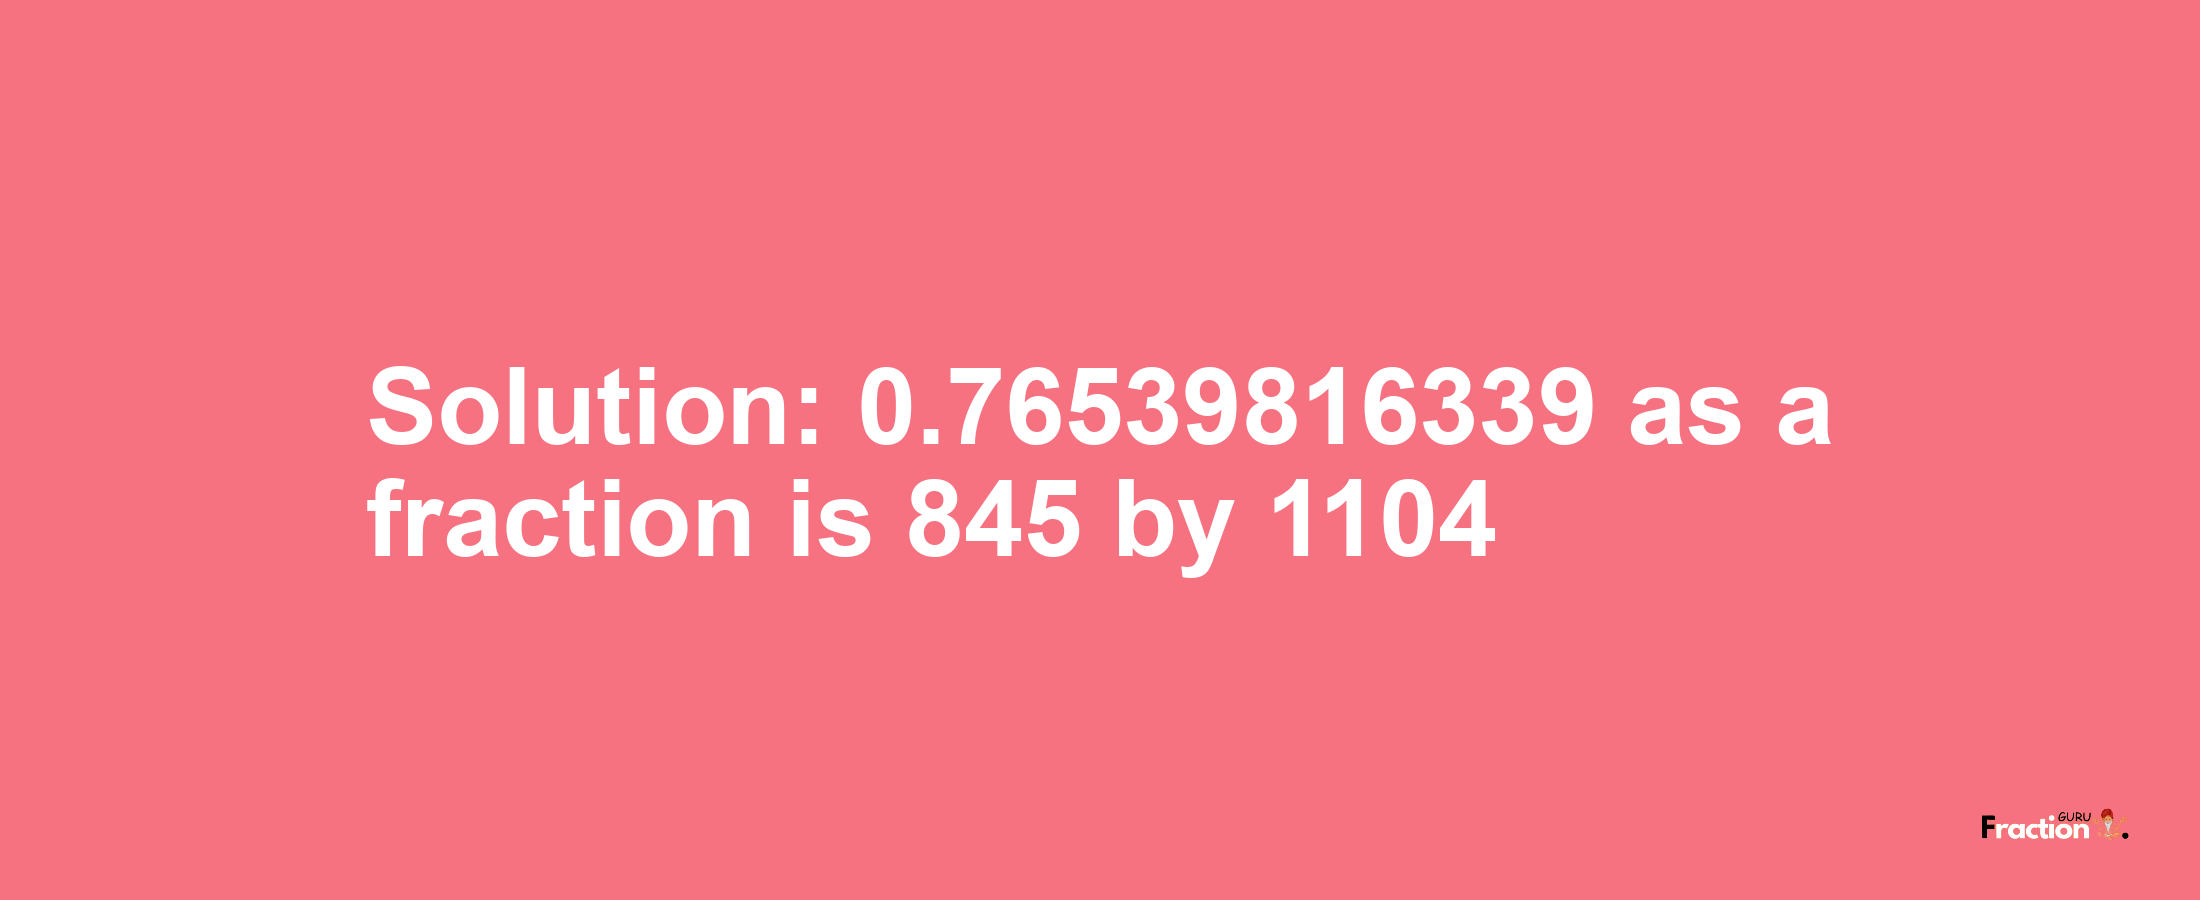 Solution:0.76539816339 as a fraction is 845/1104